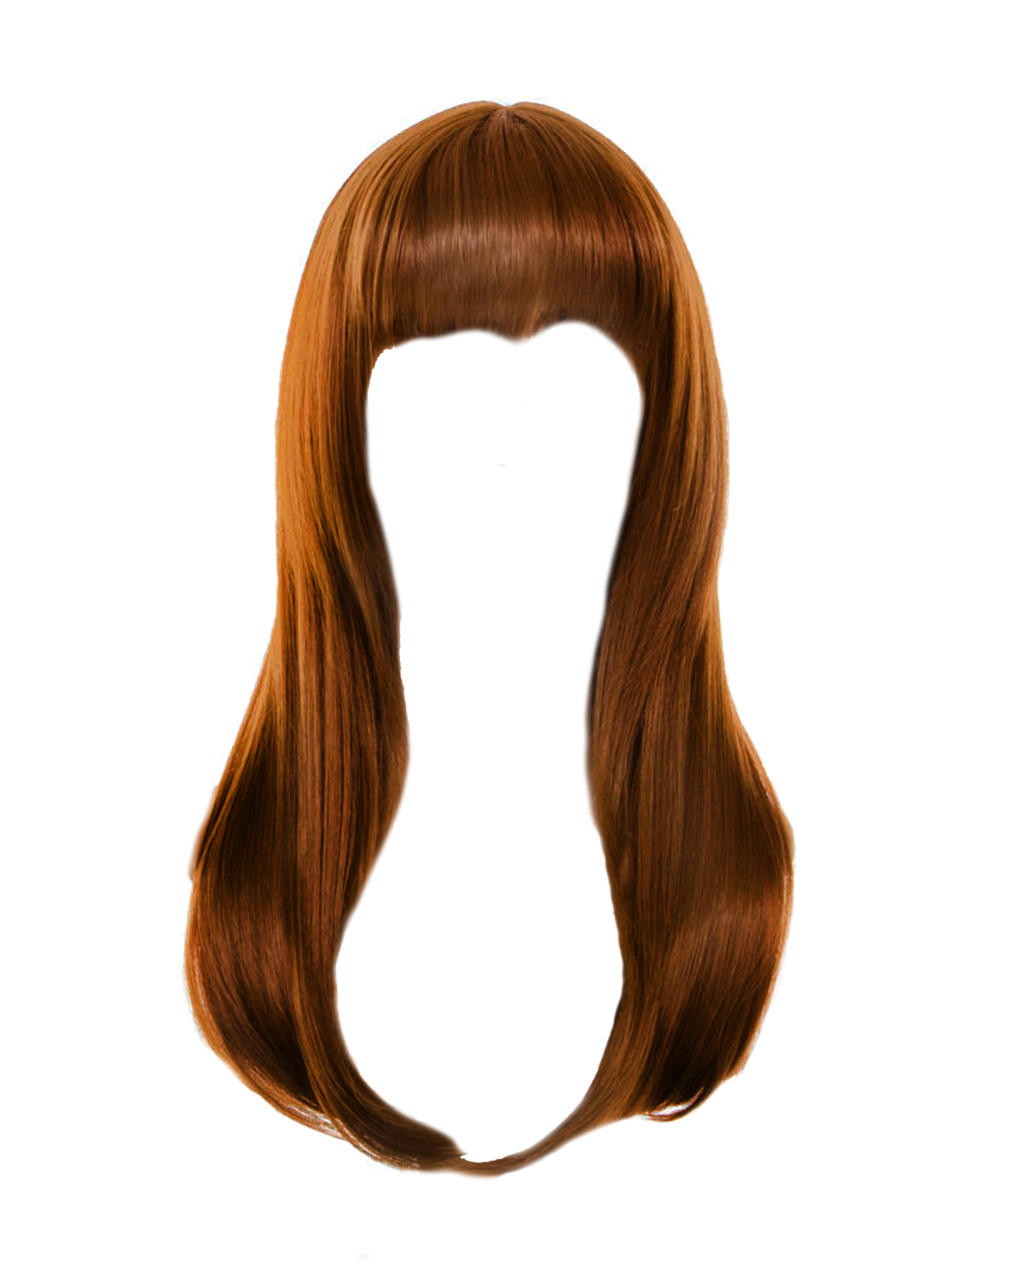 Hair Transparent PNG Pictures - Free Icons and PNG Backgrounds